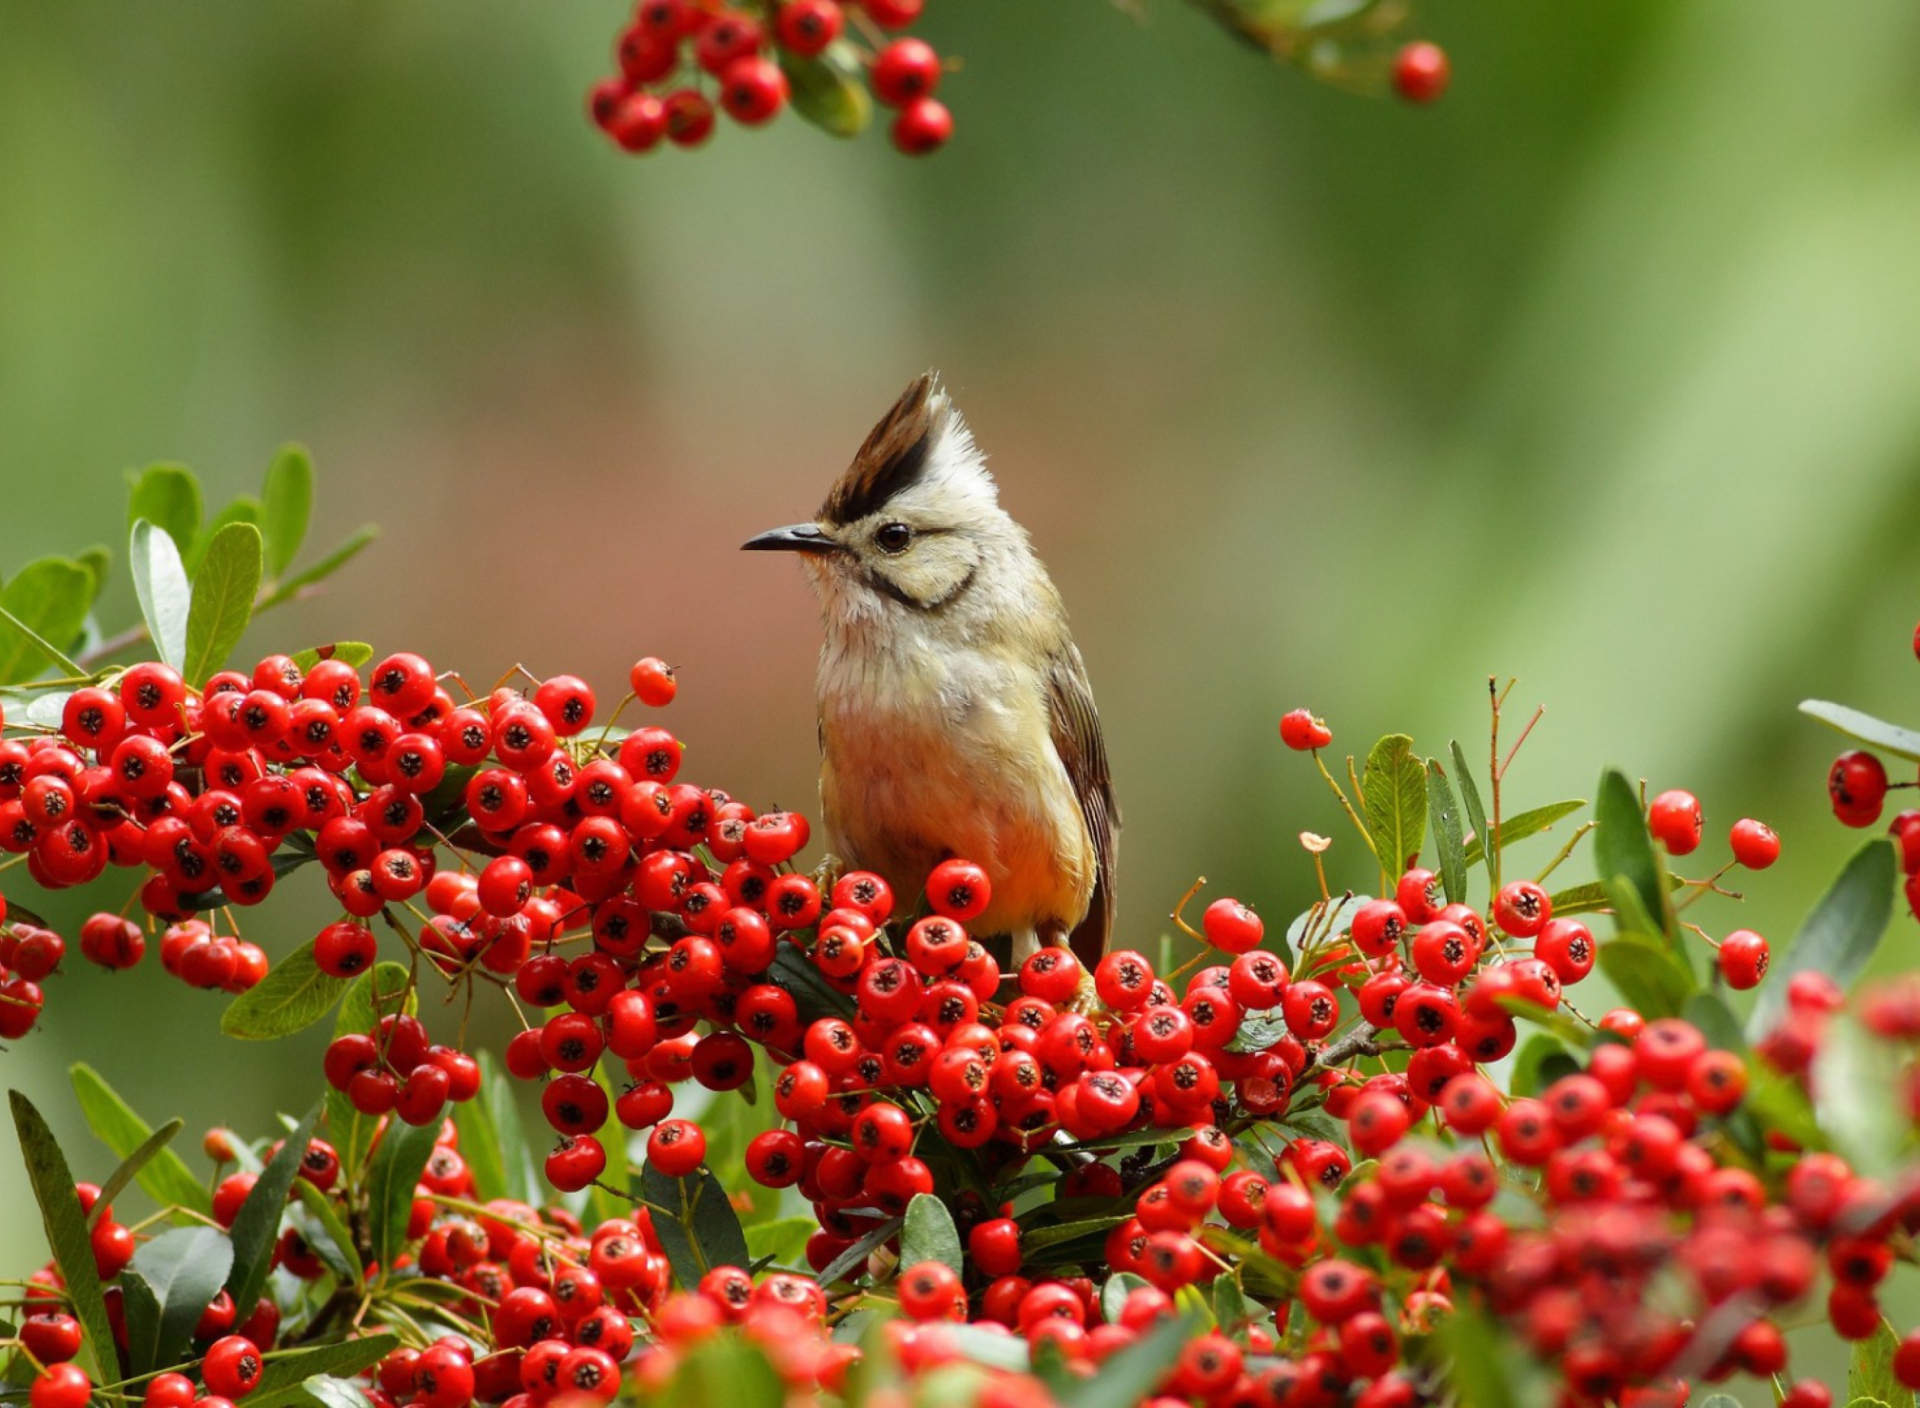 Bird On Branch With Red Berries wallpaper 1920x1408